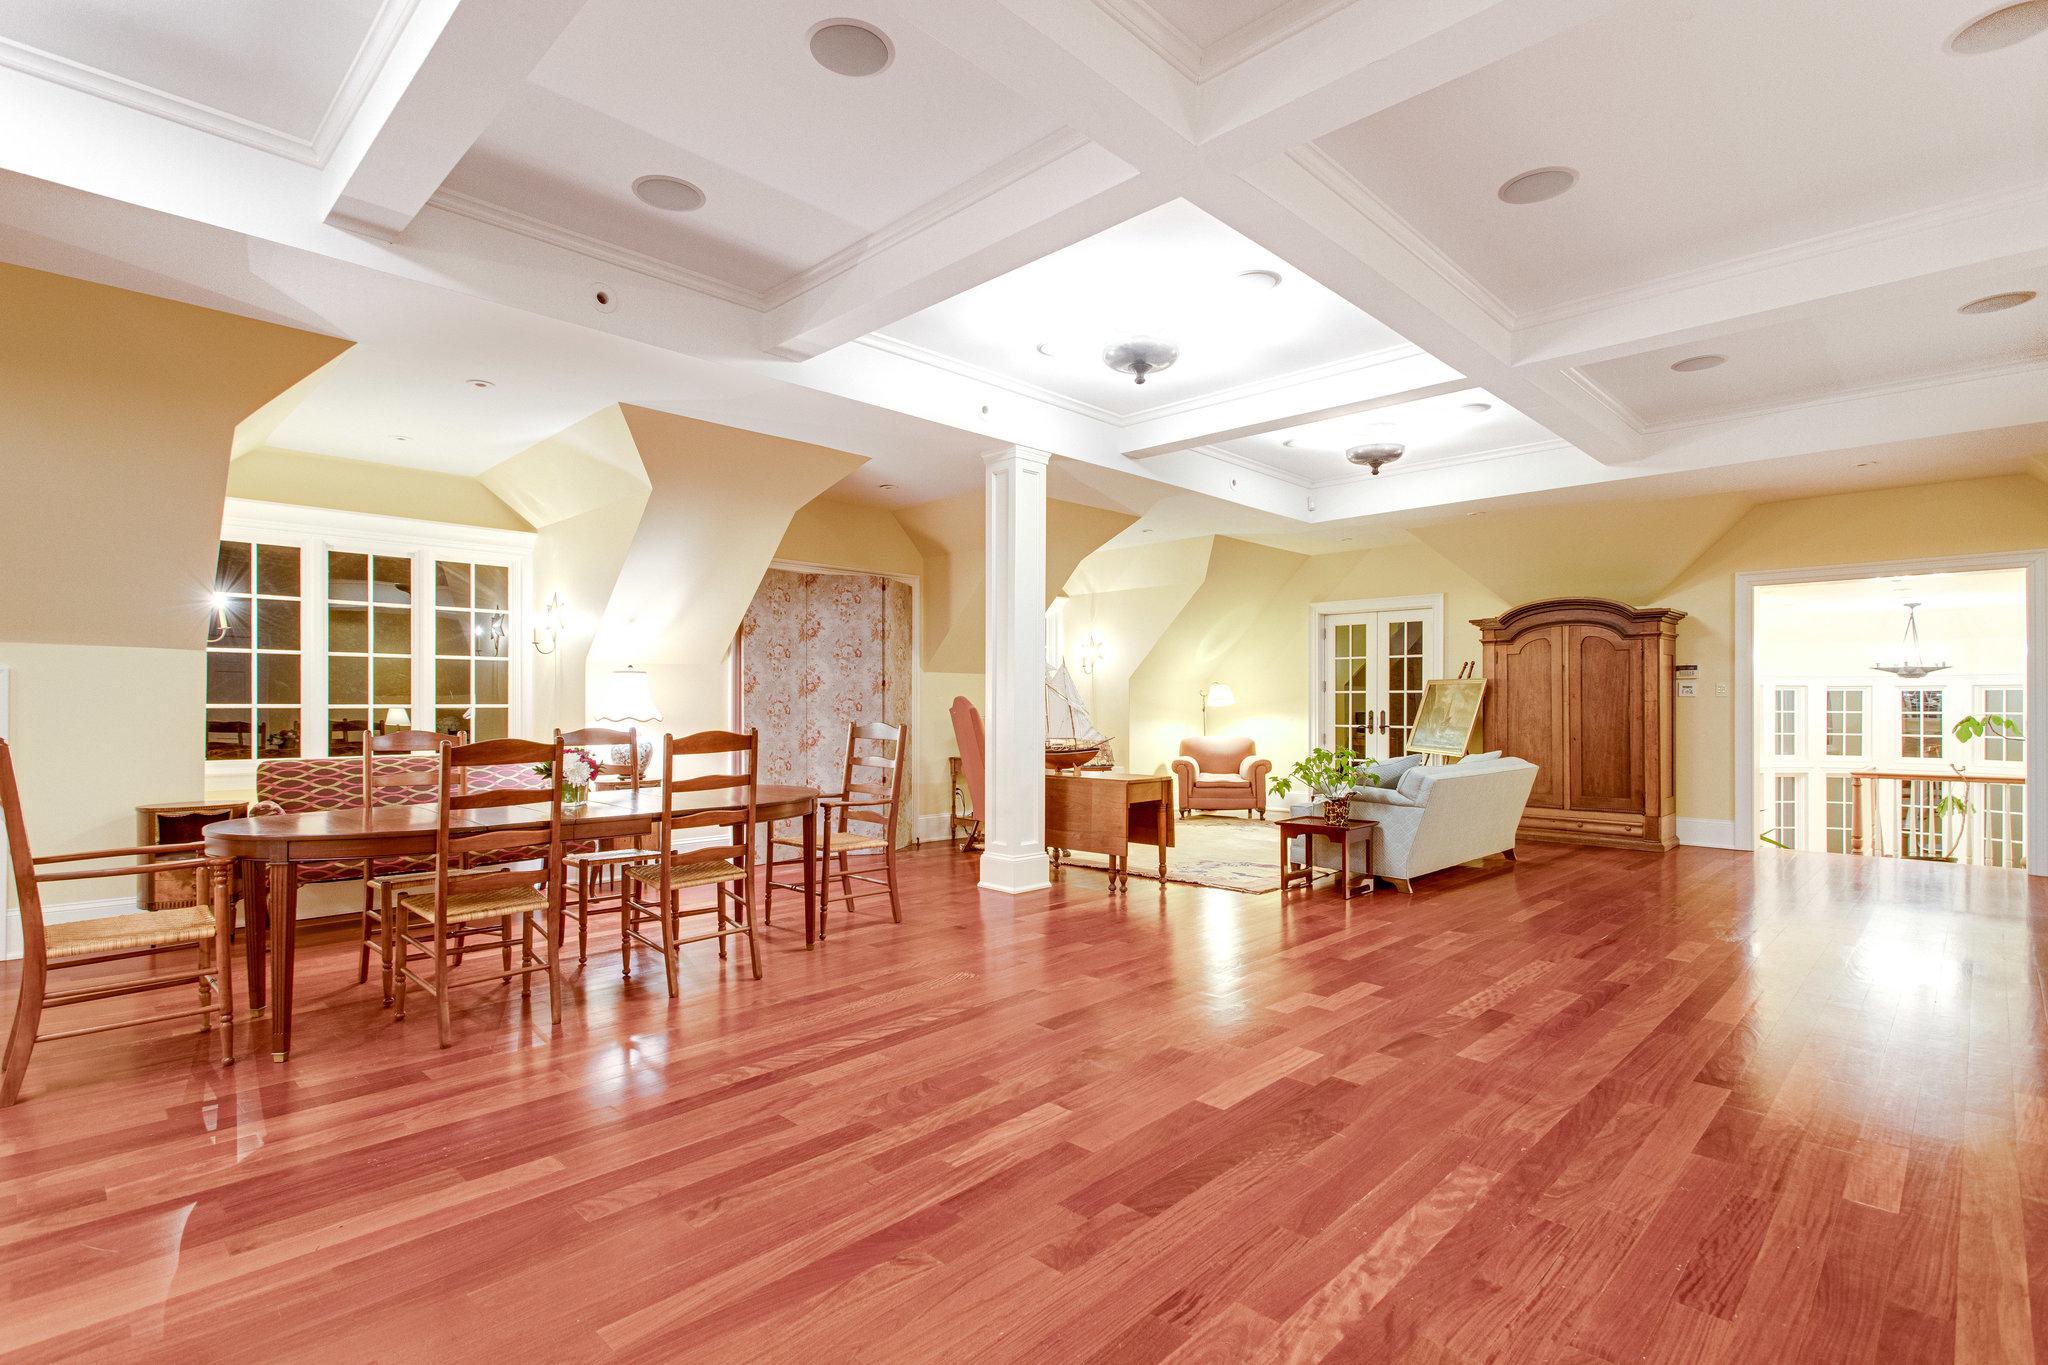 Ballroom on the third floor with coffered ceilings. 